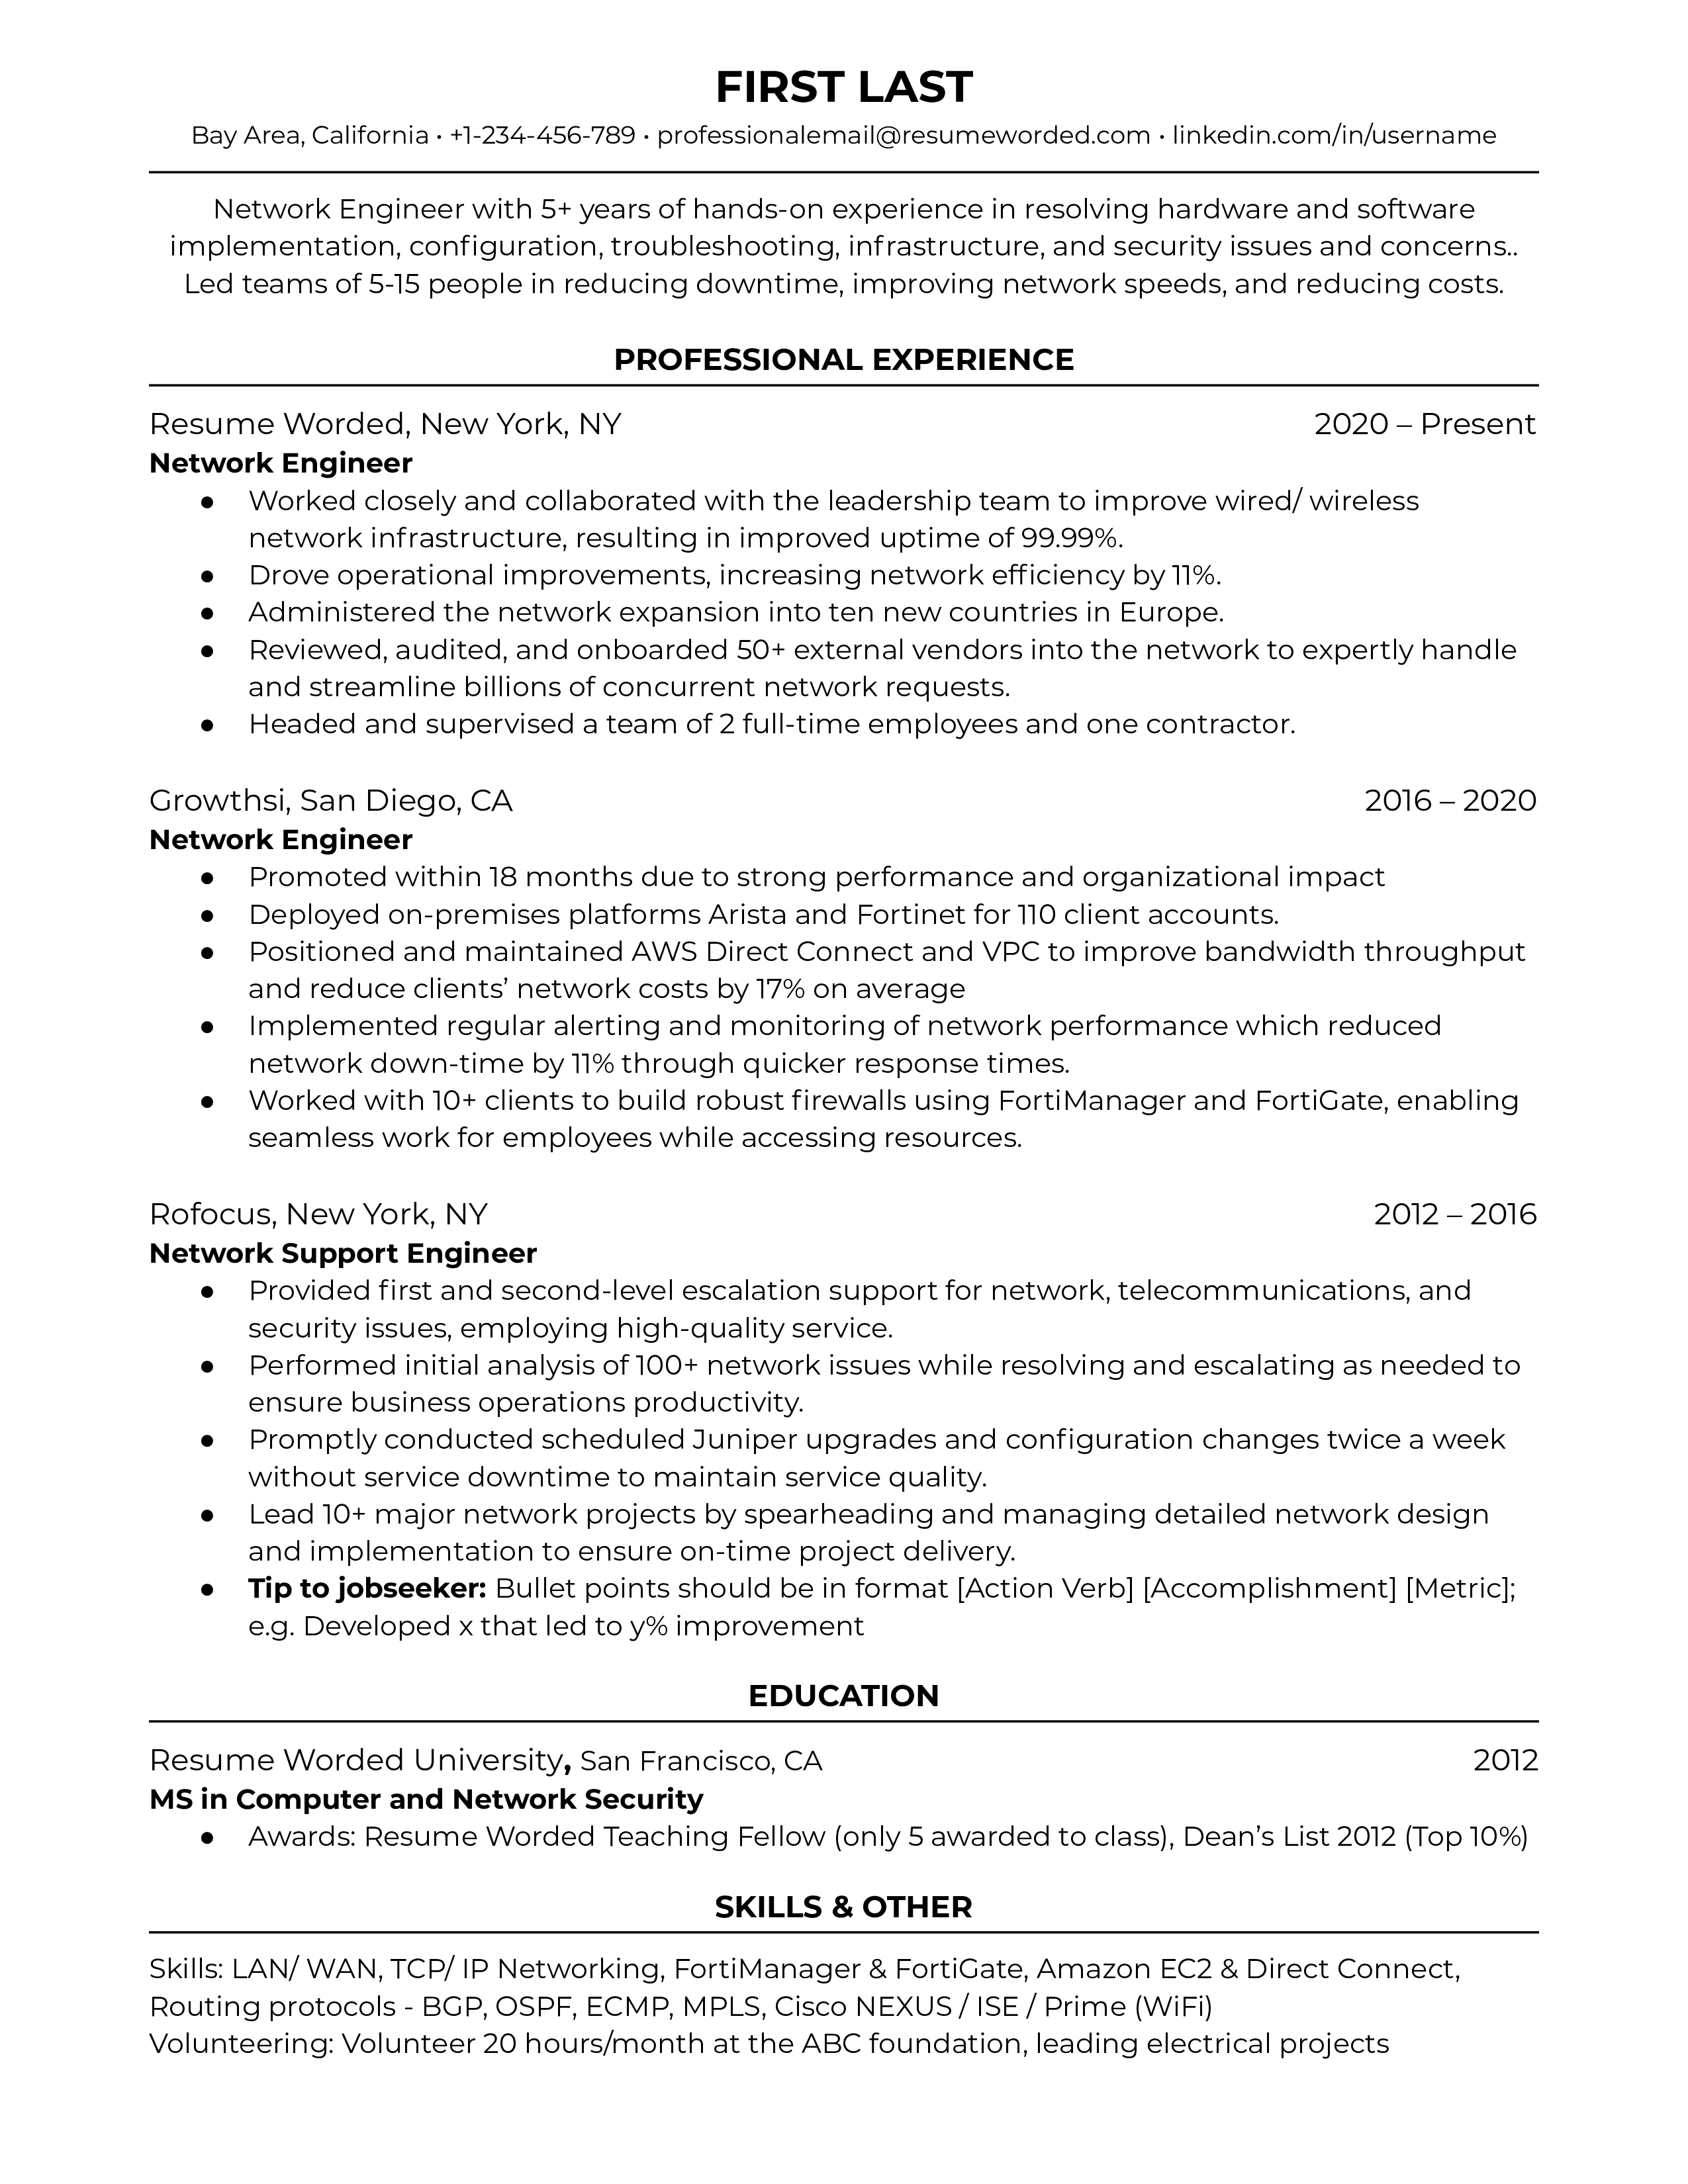 A sample CV of a network engineer showcasing technical skills and continuous learning.